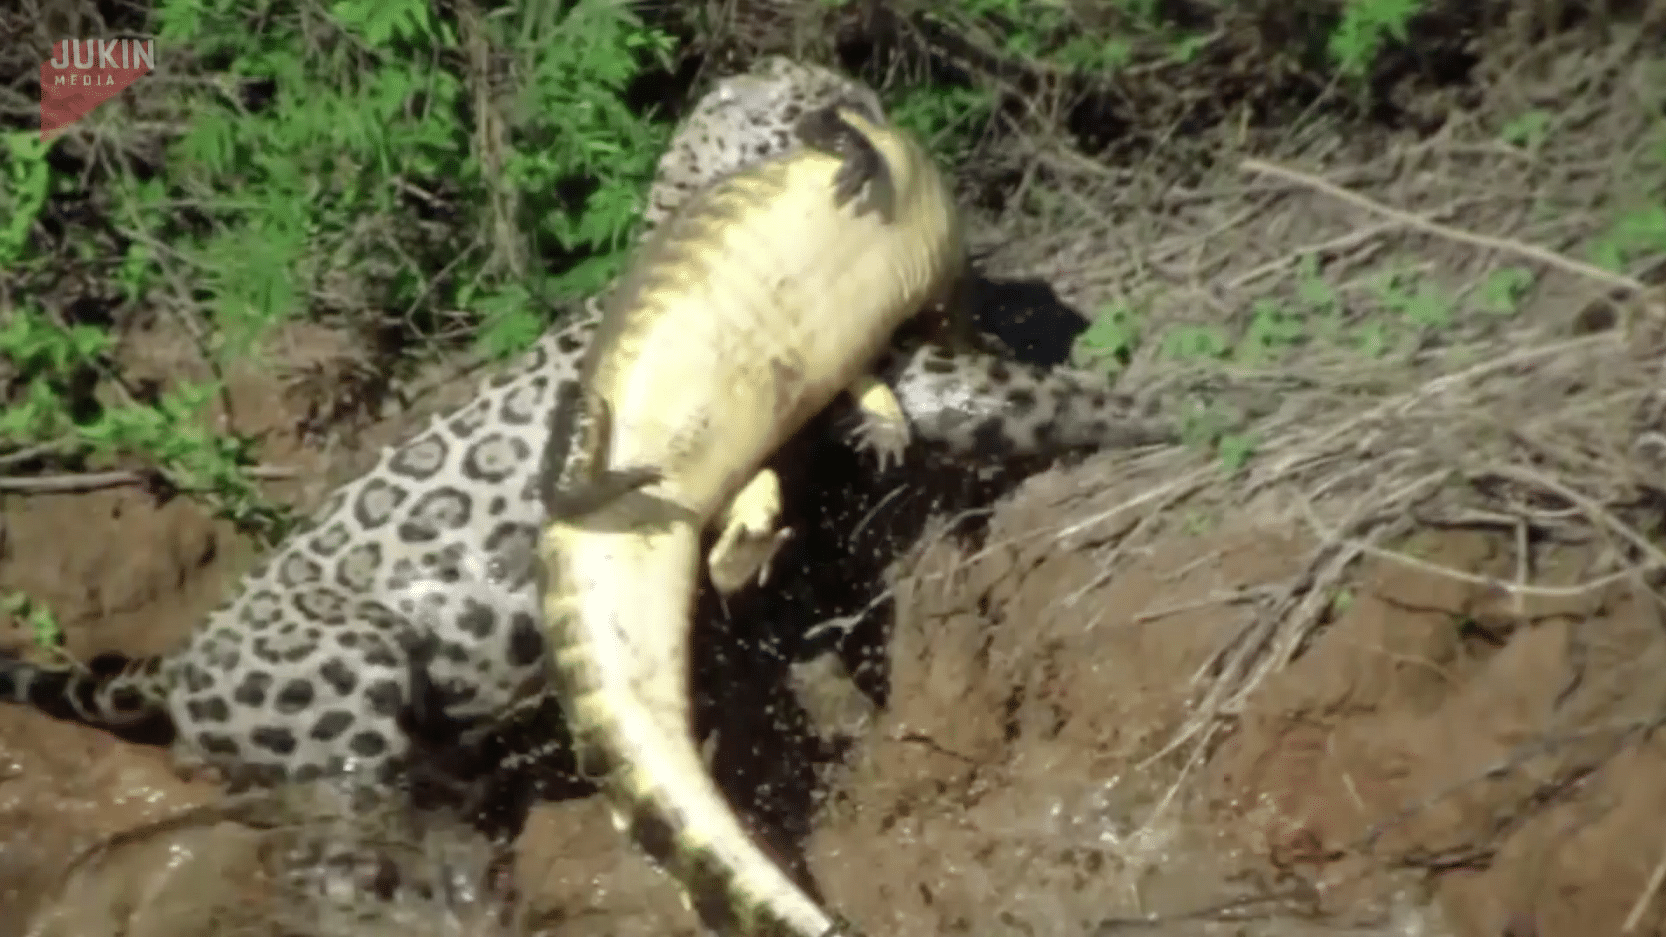 Jaguar with the alligator between his jaws.